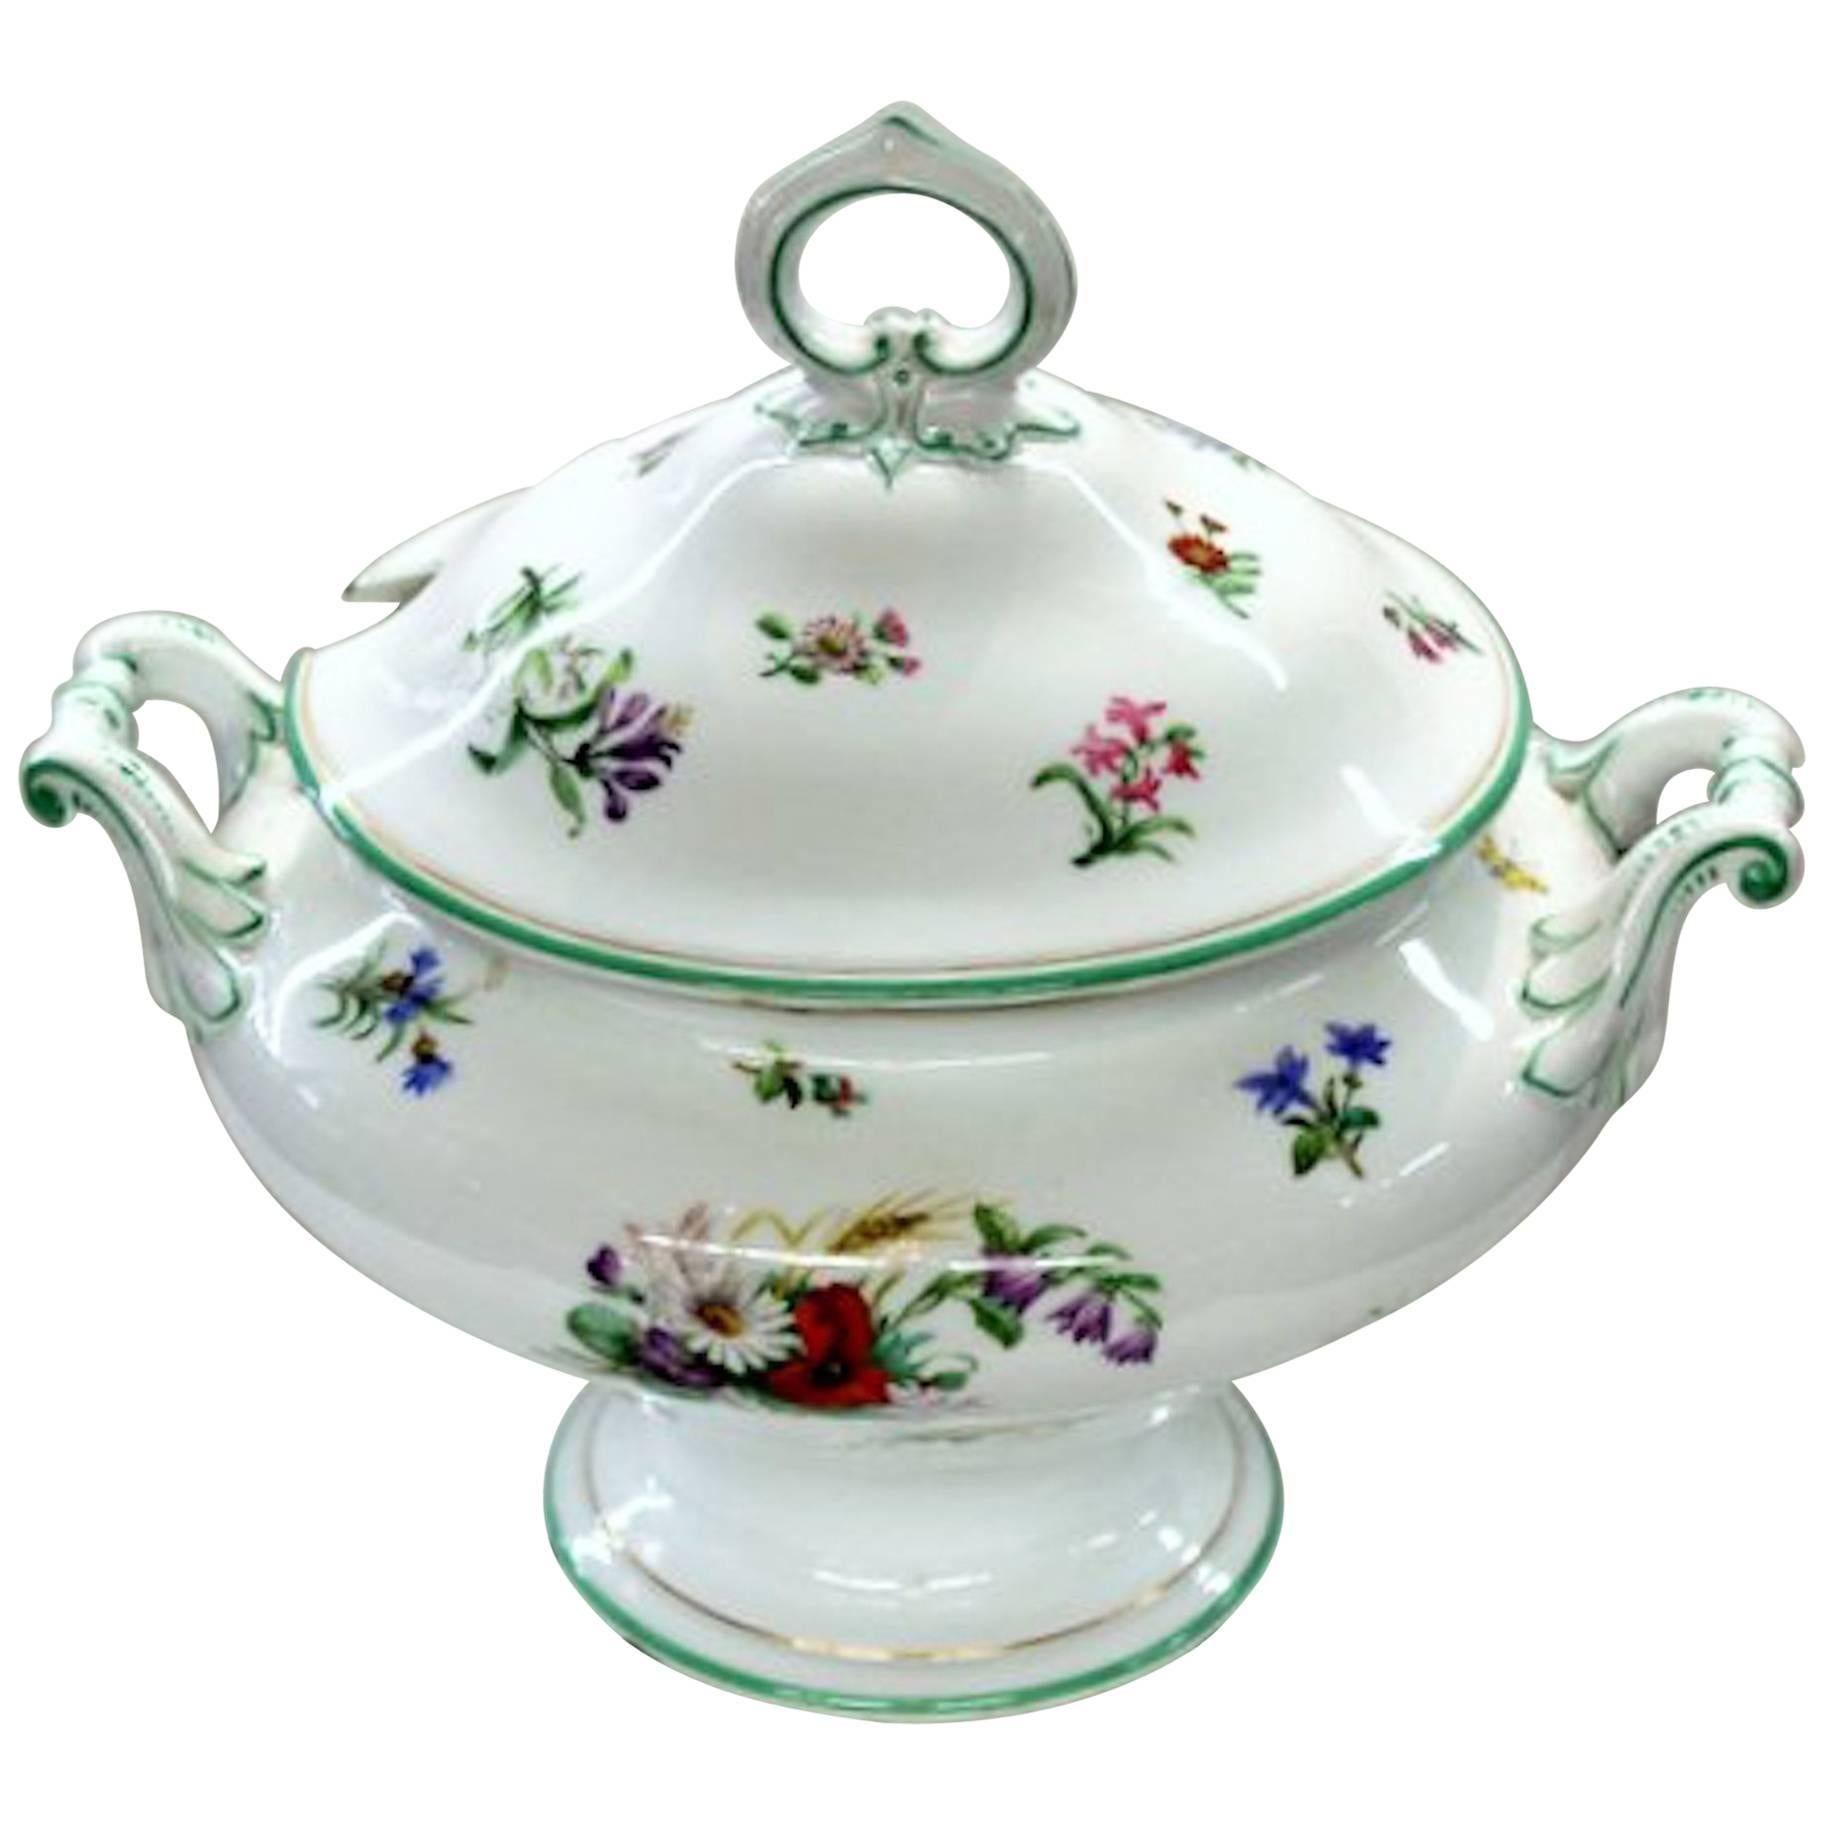 Continental Hand-Painted Porcelain Soup Tureen with Botanicals and Insects For Sale